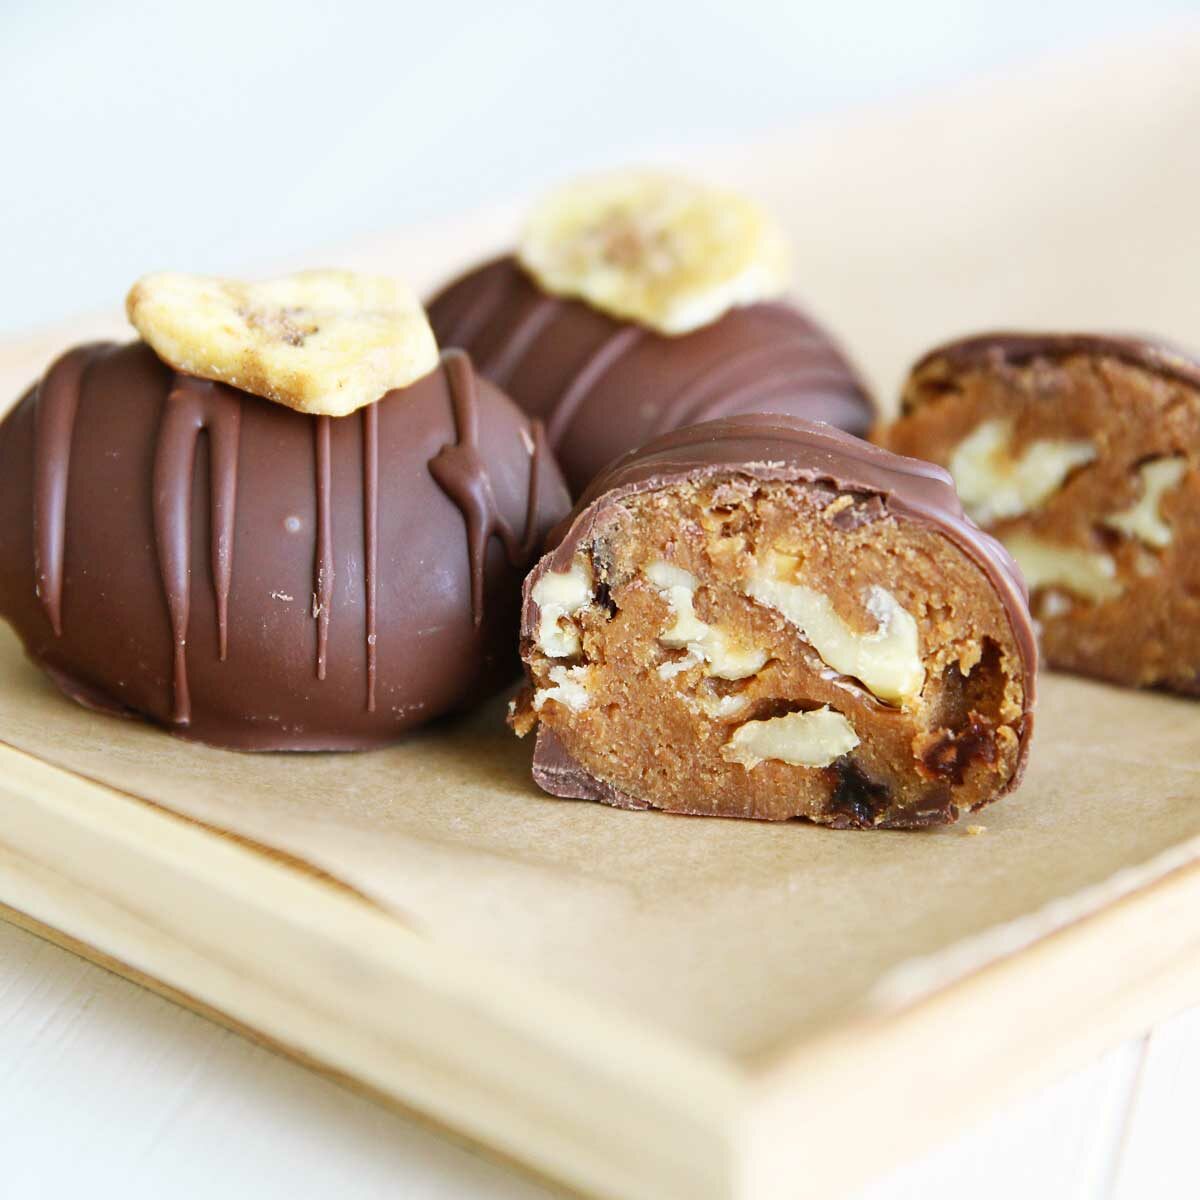 Easy & Delicious Banana Chocolate Easter Eggs Recipe with PB Fit - Only 3 Ingredients! - Banana Chocolate Easter Eggs